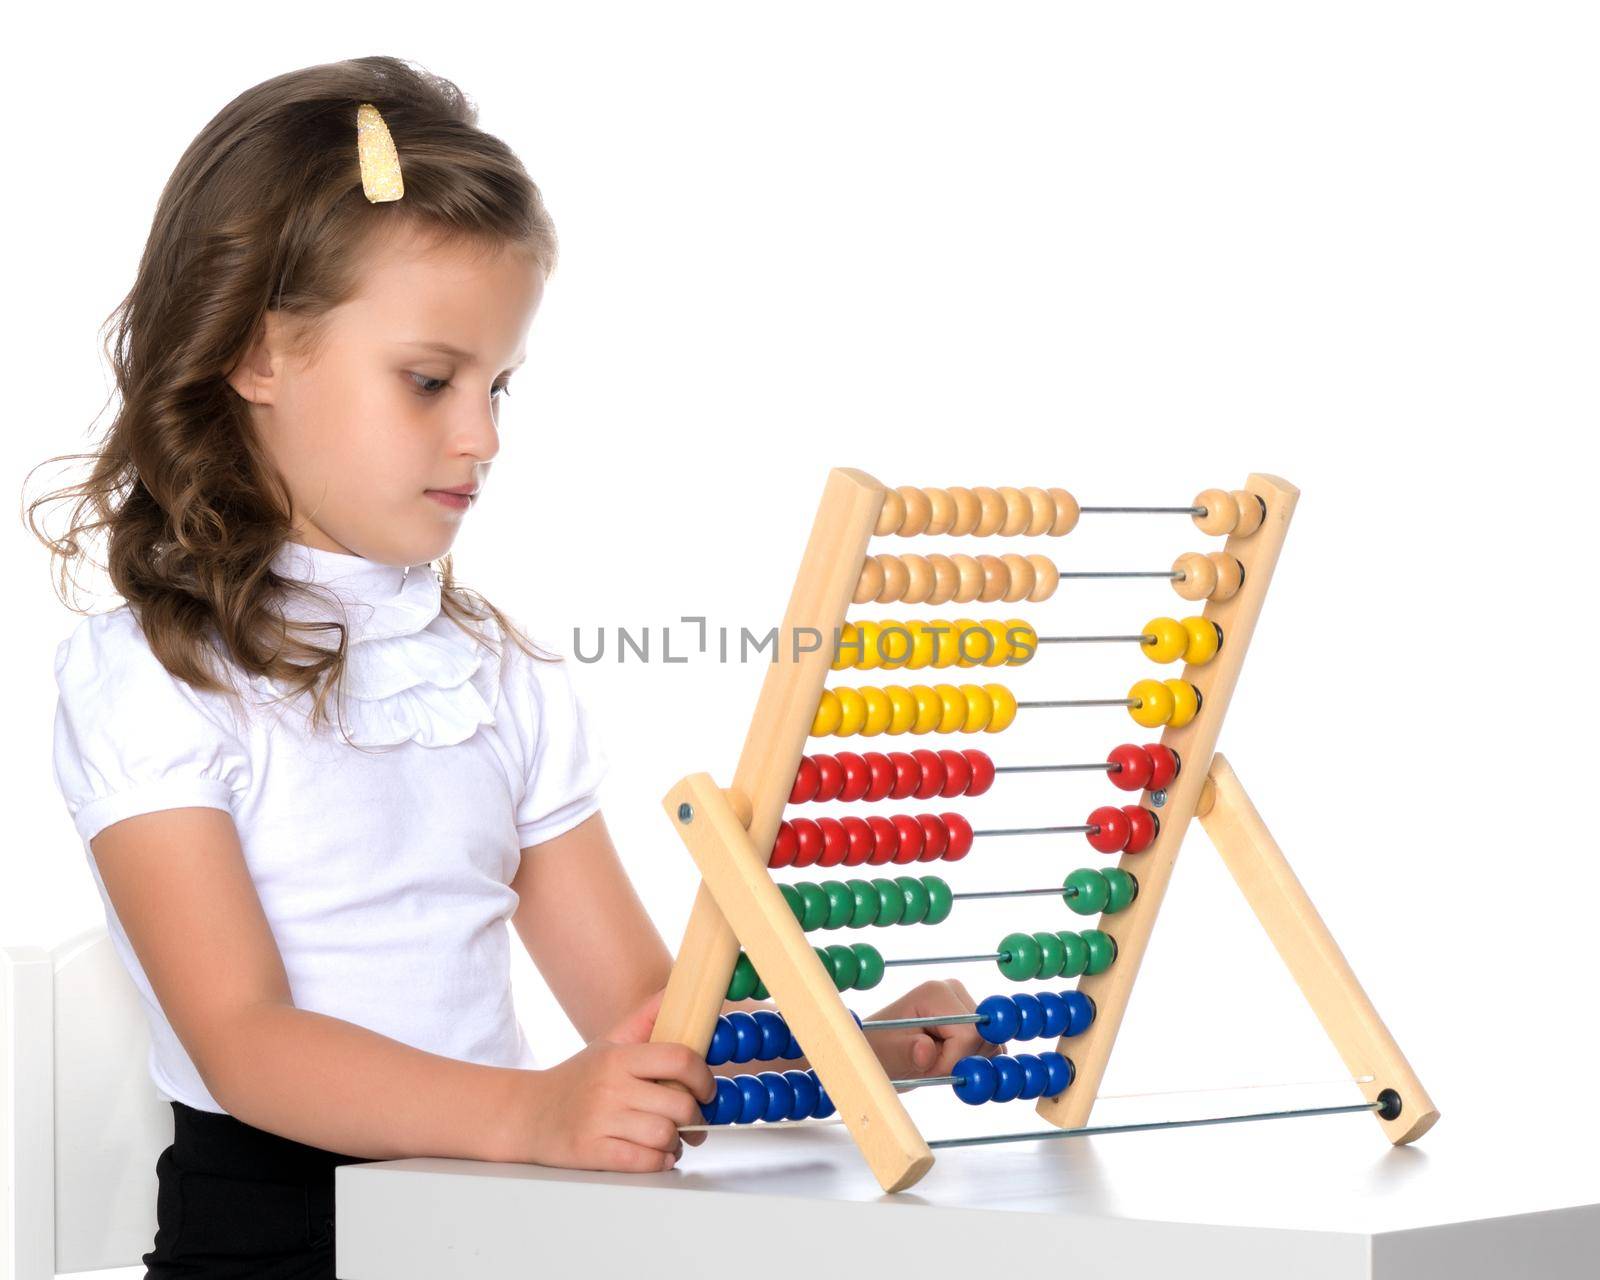 The girl counts on abacus.The concept of happiness, people, family, child, childhood, teaching math at school or kindergarten. Isolated on white background